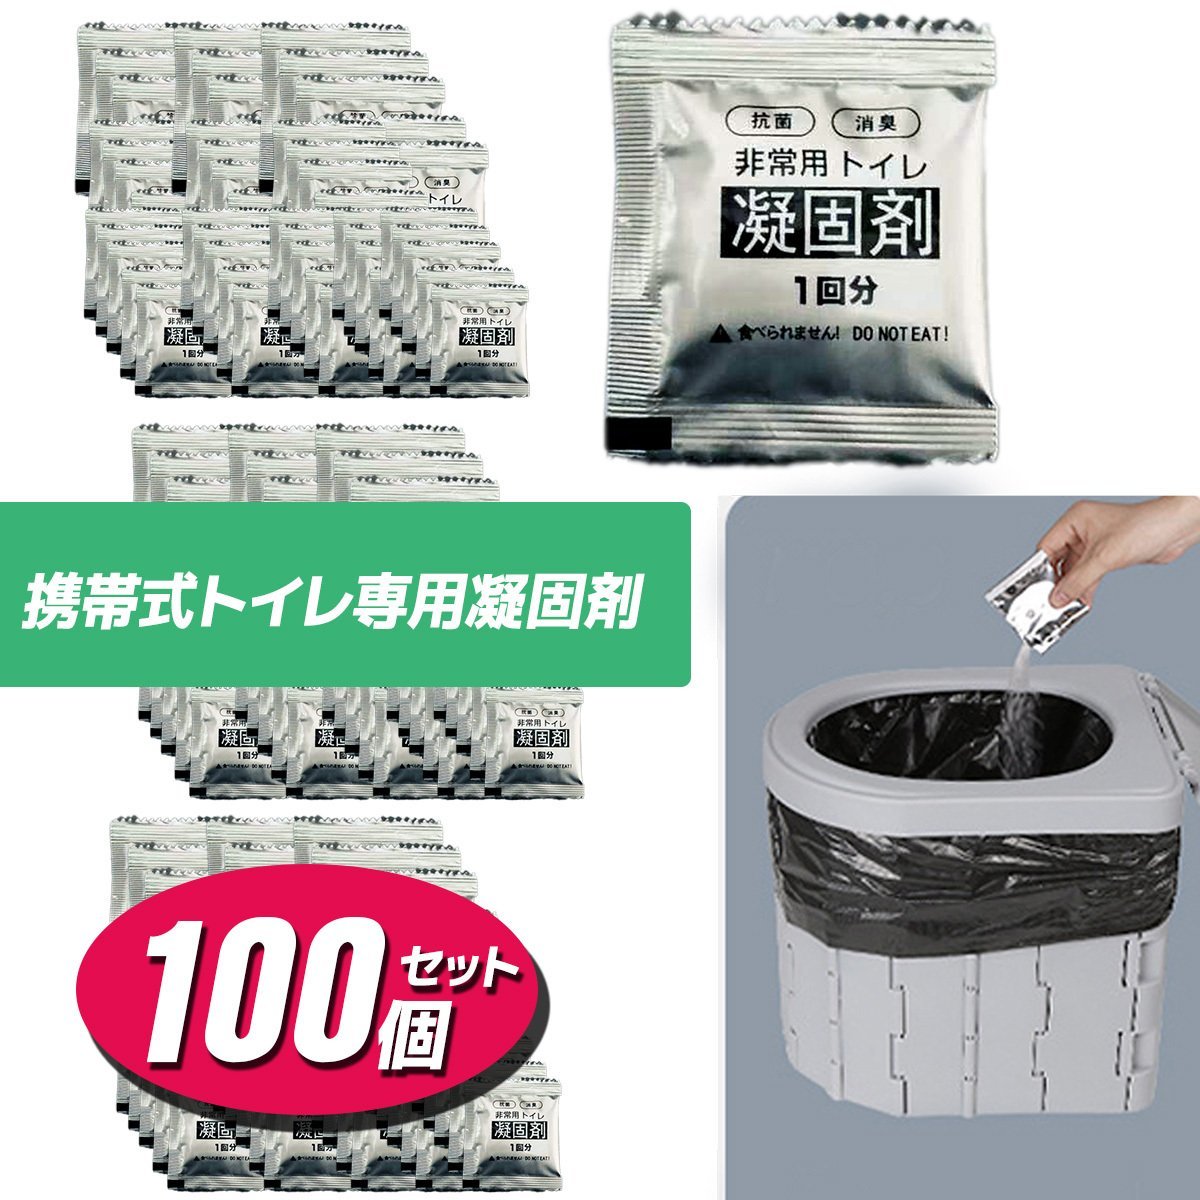  immediate payment * anti-bacterial deodorization simple for emergency toilet ...100 batch portable toilet disaster prevention supplies disaster prevention goods non usually mobile toilet 